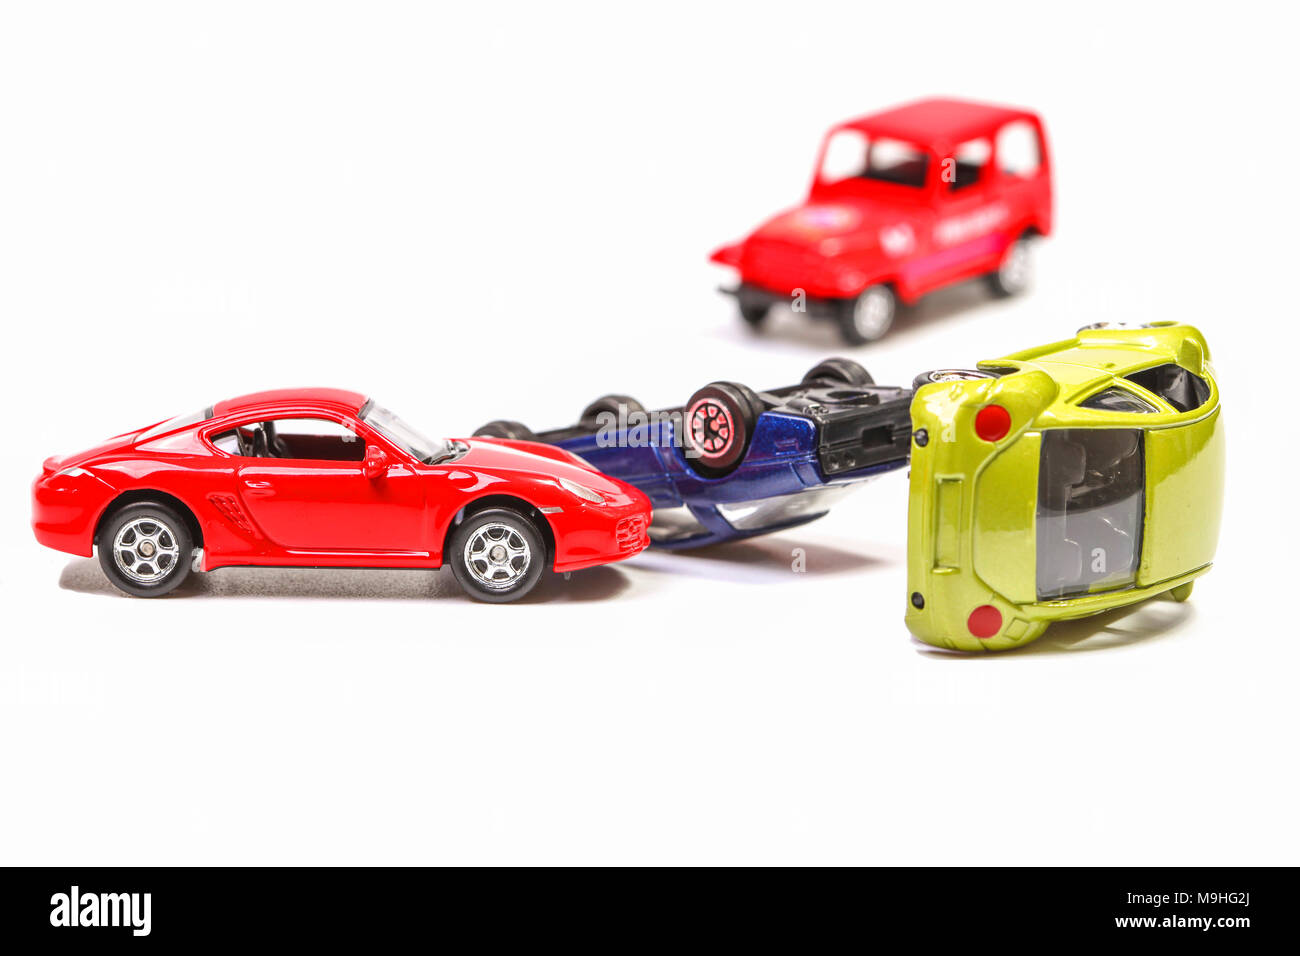 Car crash with toy cars Stock Photo